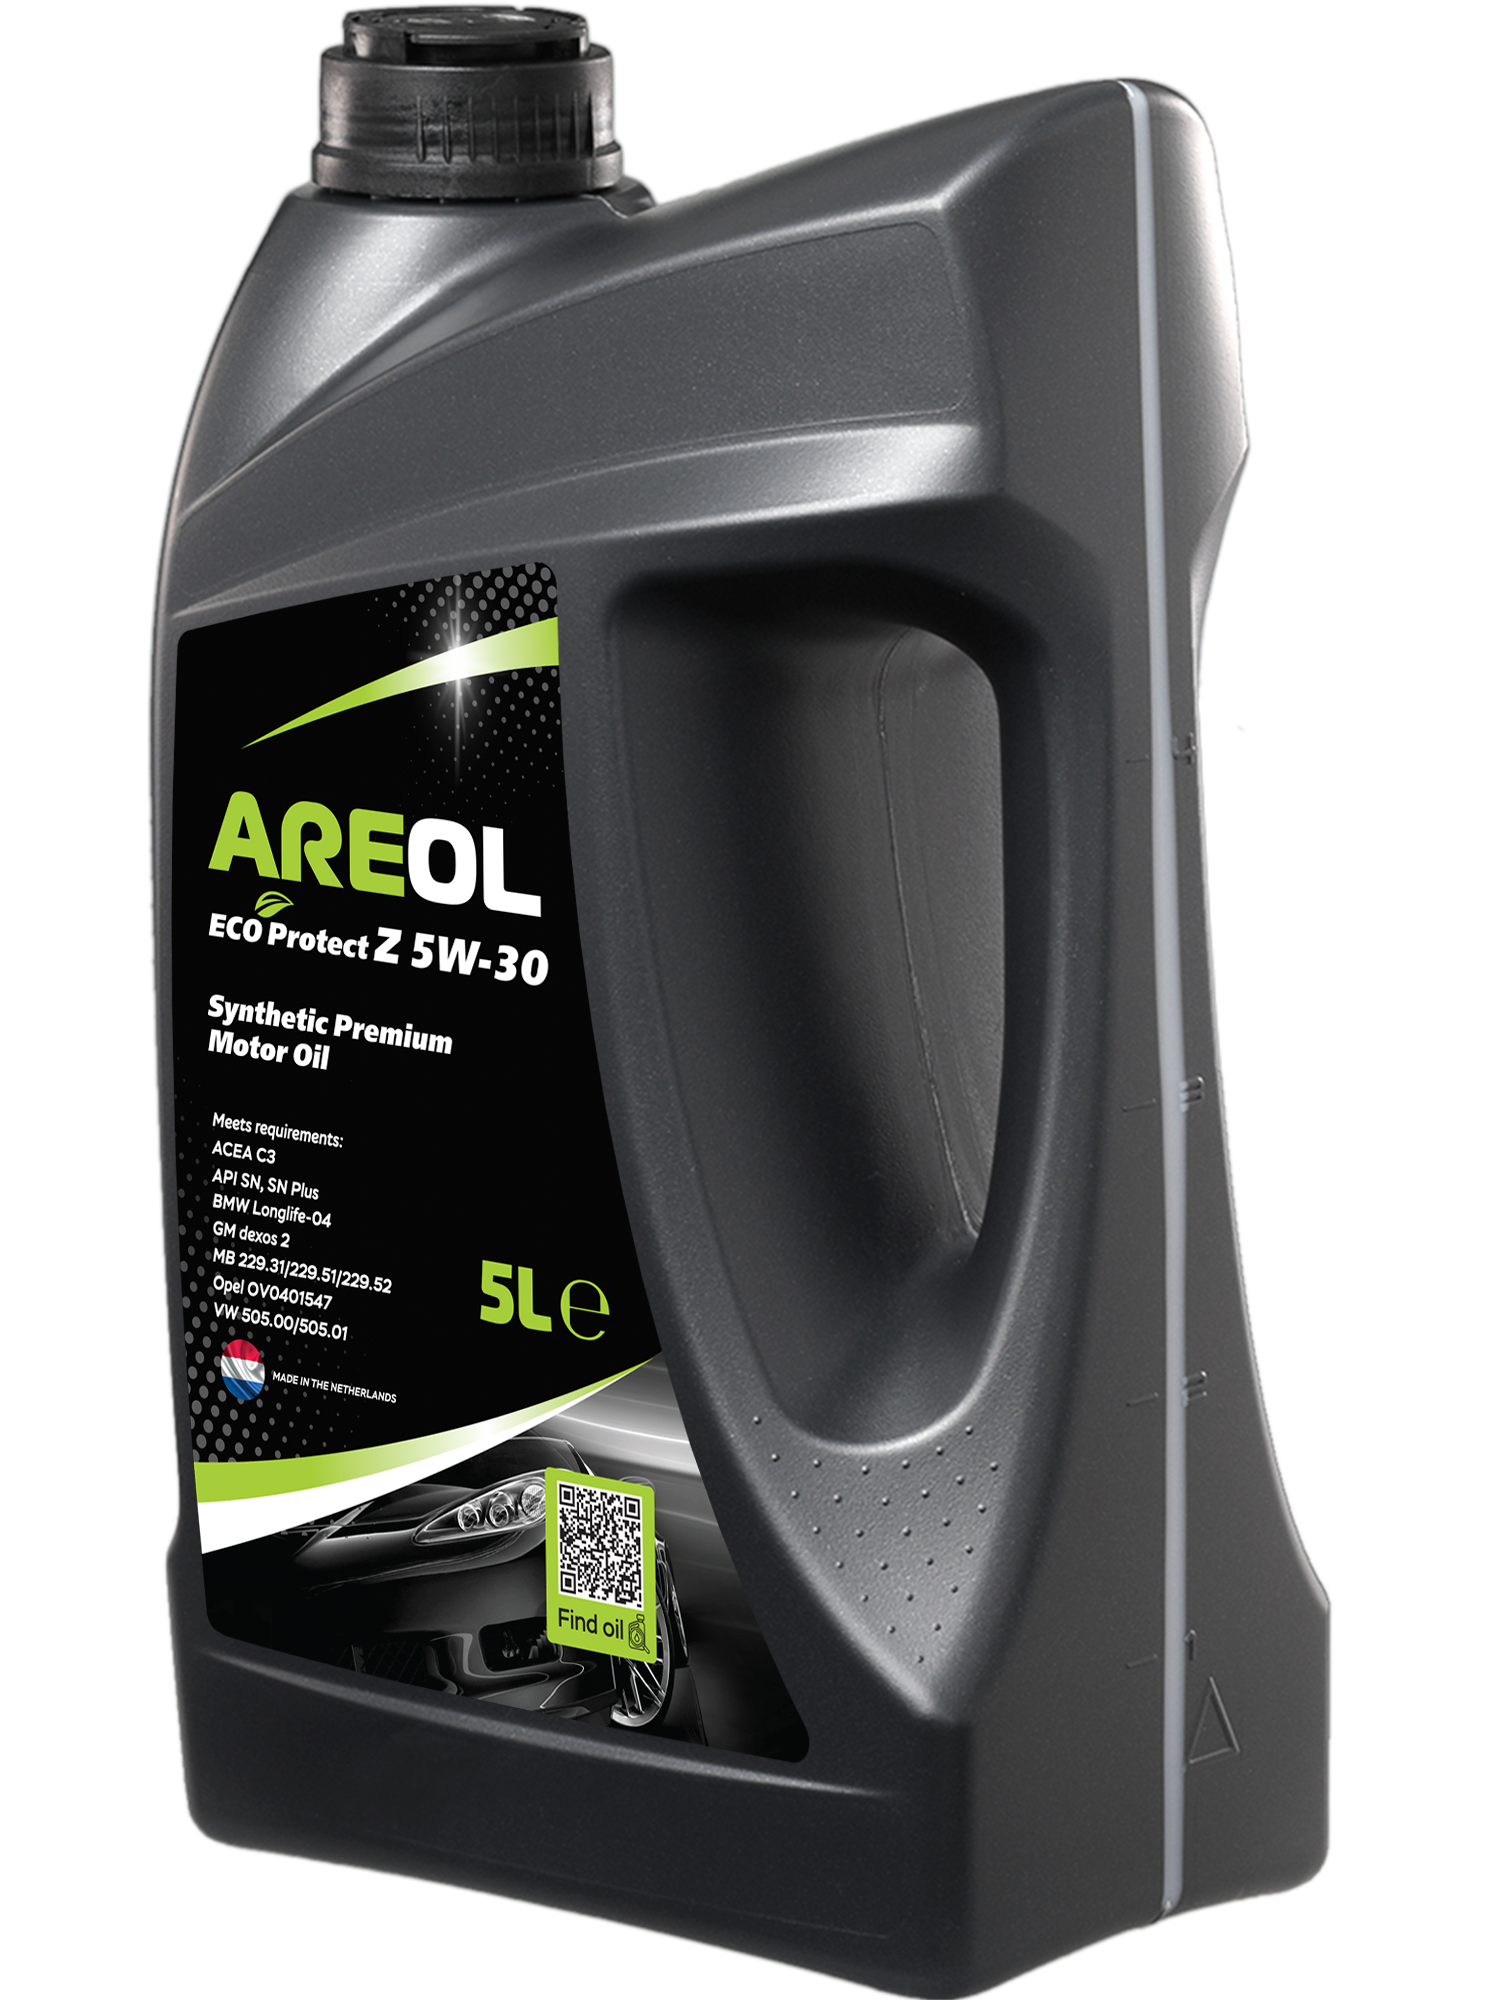 Motor Oil AREOL ECO Protect Z 5W-30 5L